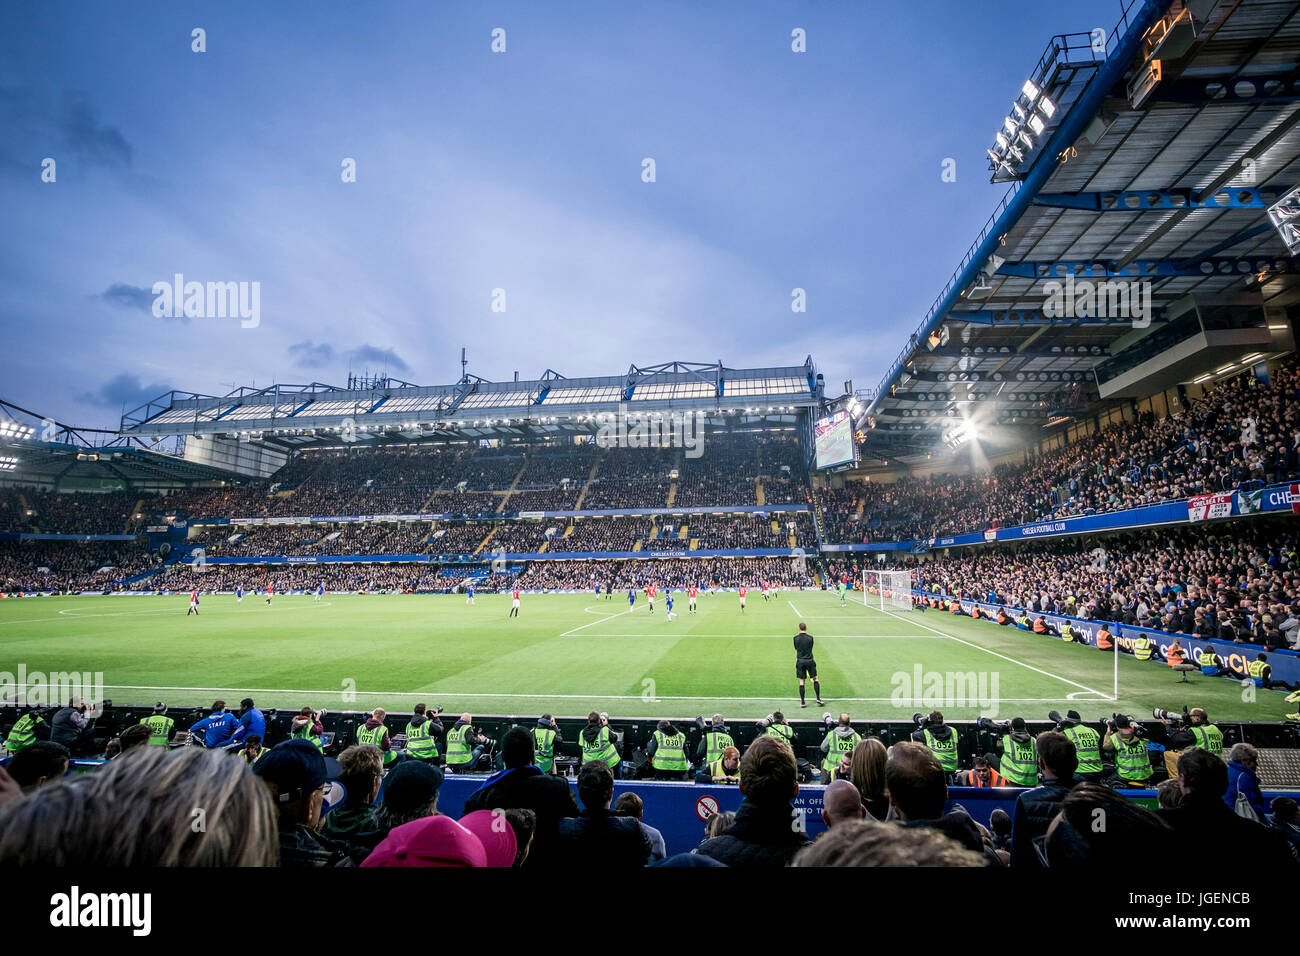 People watching a match at the Stamford Bridge football stadium, which is  located in Fulham in London, United Kingdom. The Stadium is home ground of Chelsea  F.C. and has a capacity of